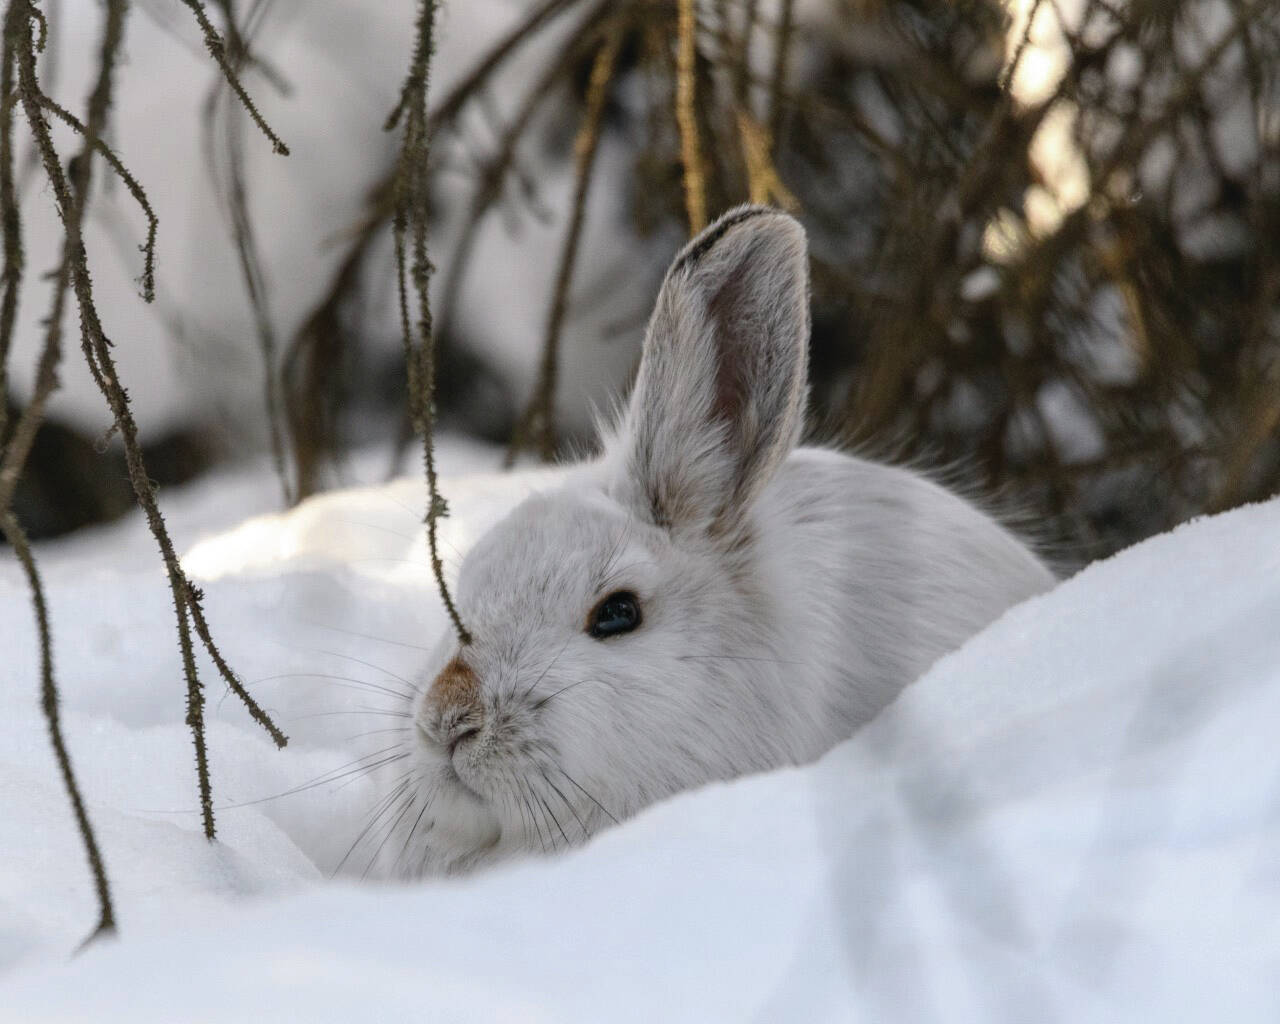 Colin Canterbury/FWS
Many of the wildlife on the Kenai National Wildlife Refuge, including snowshoe hare, ermine, and ptarmigan, adapt and change with the seasons.